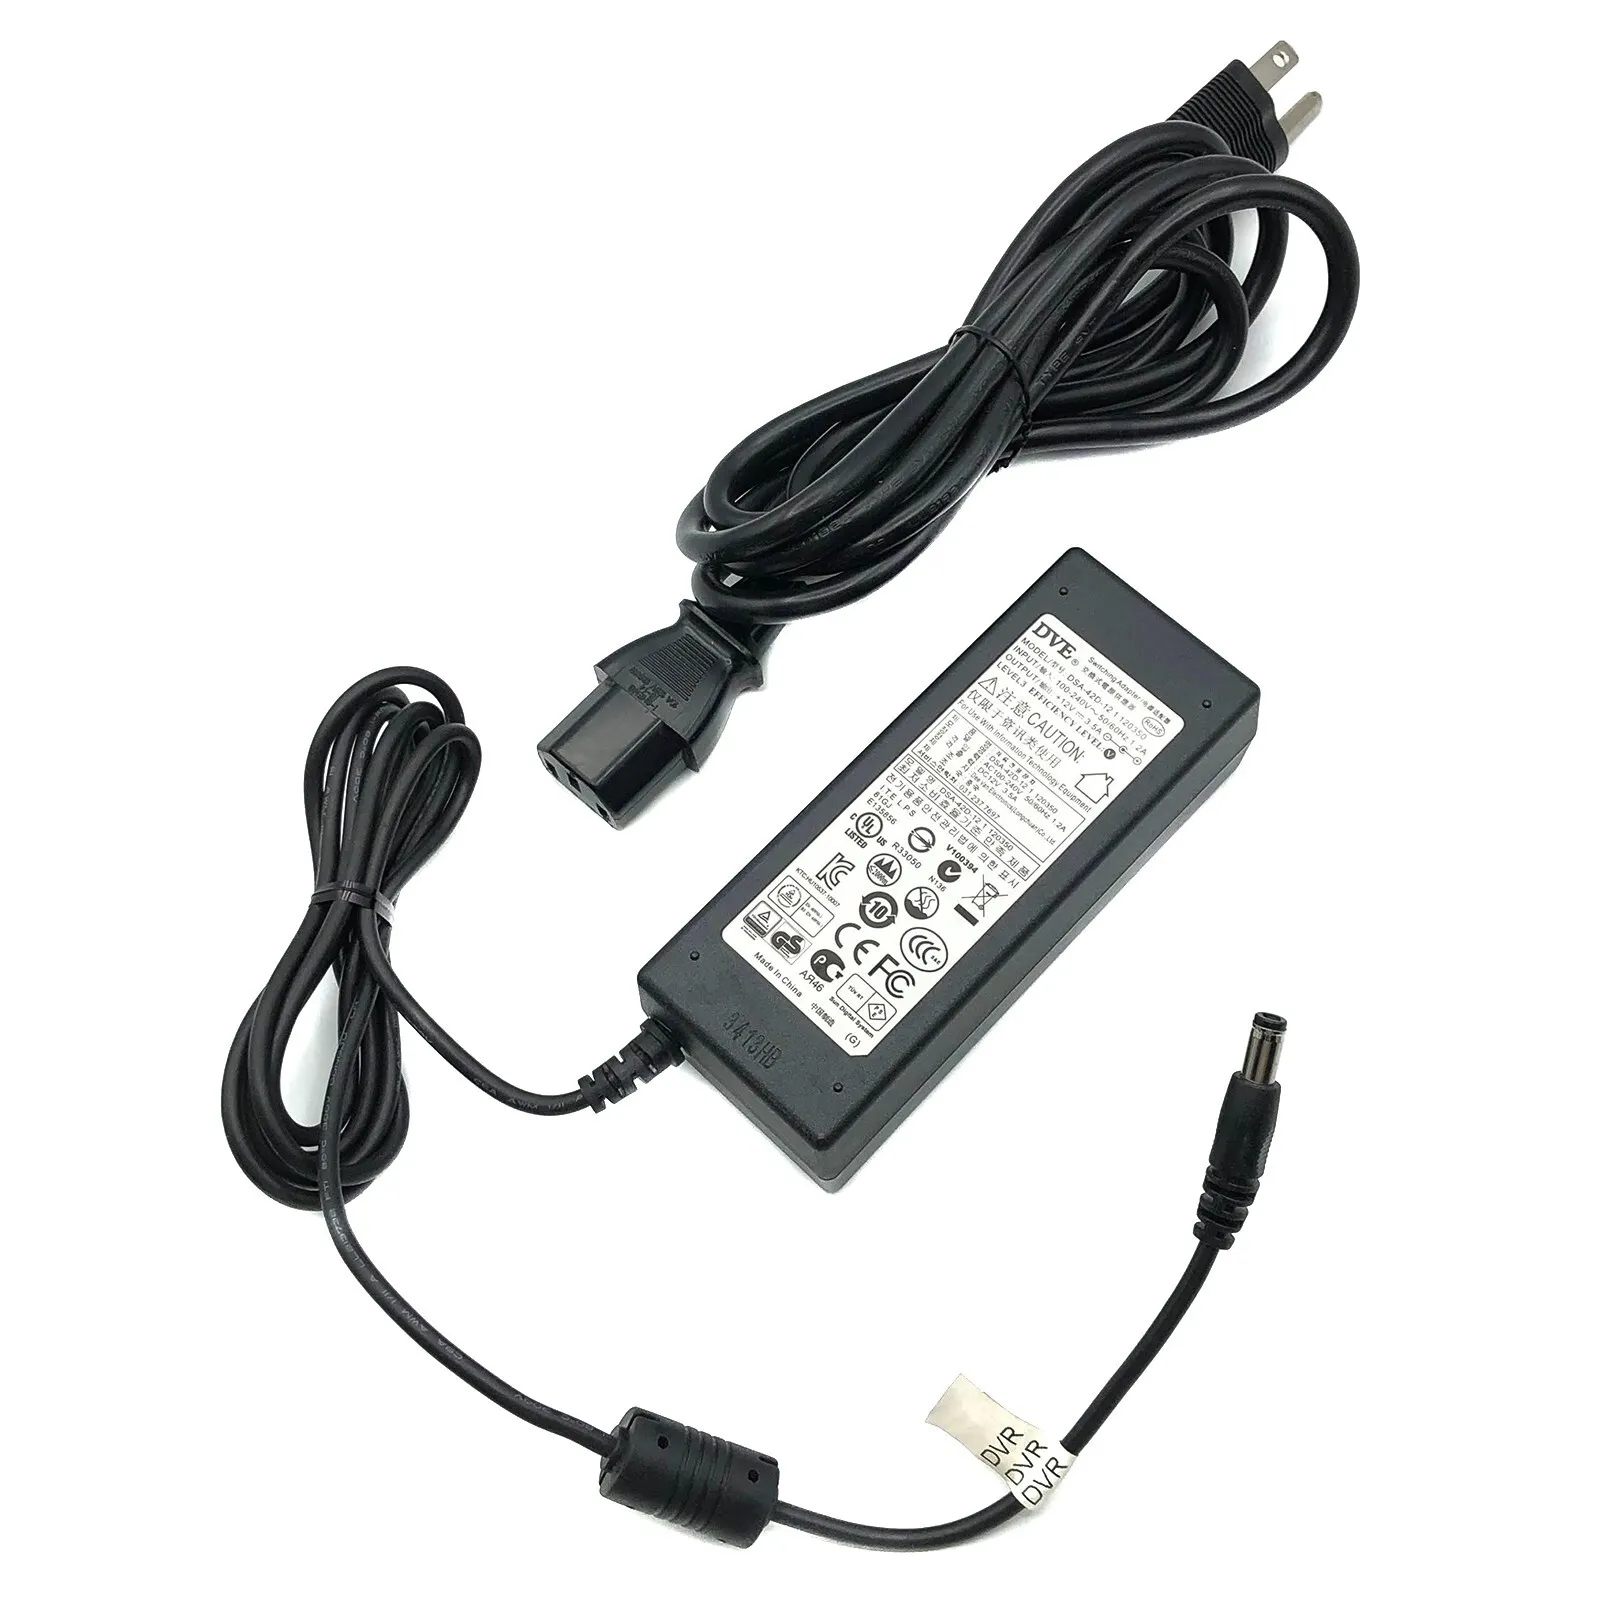 *Brand NEW*Genuine 39W DVE 12V 3.5A AC Switching Adapter Model DSA-42D-12 1 120350 Power Supply